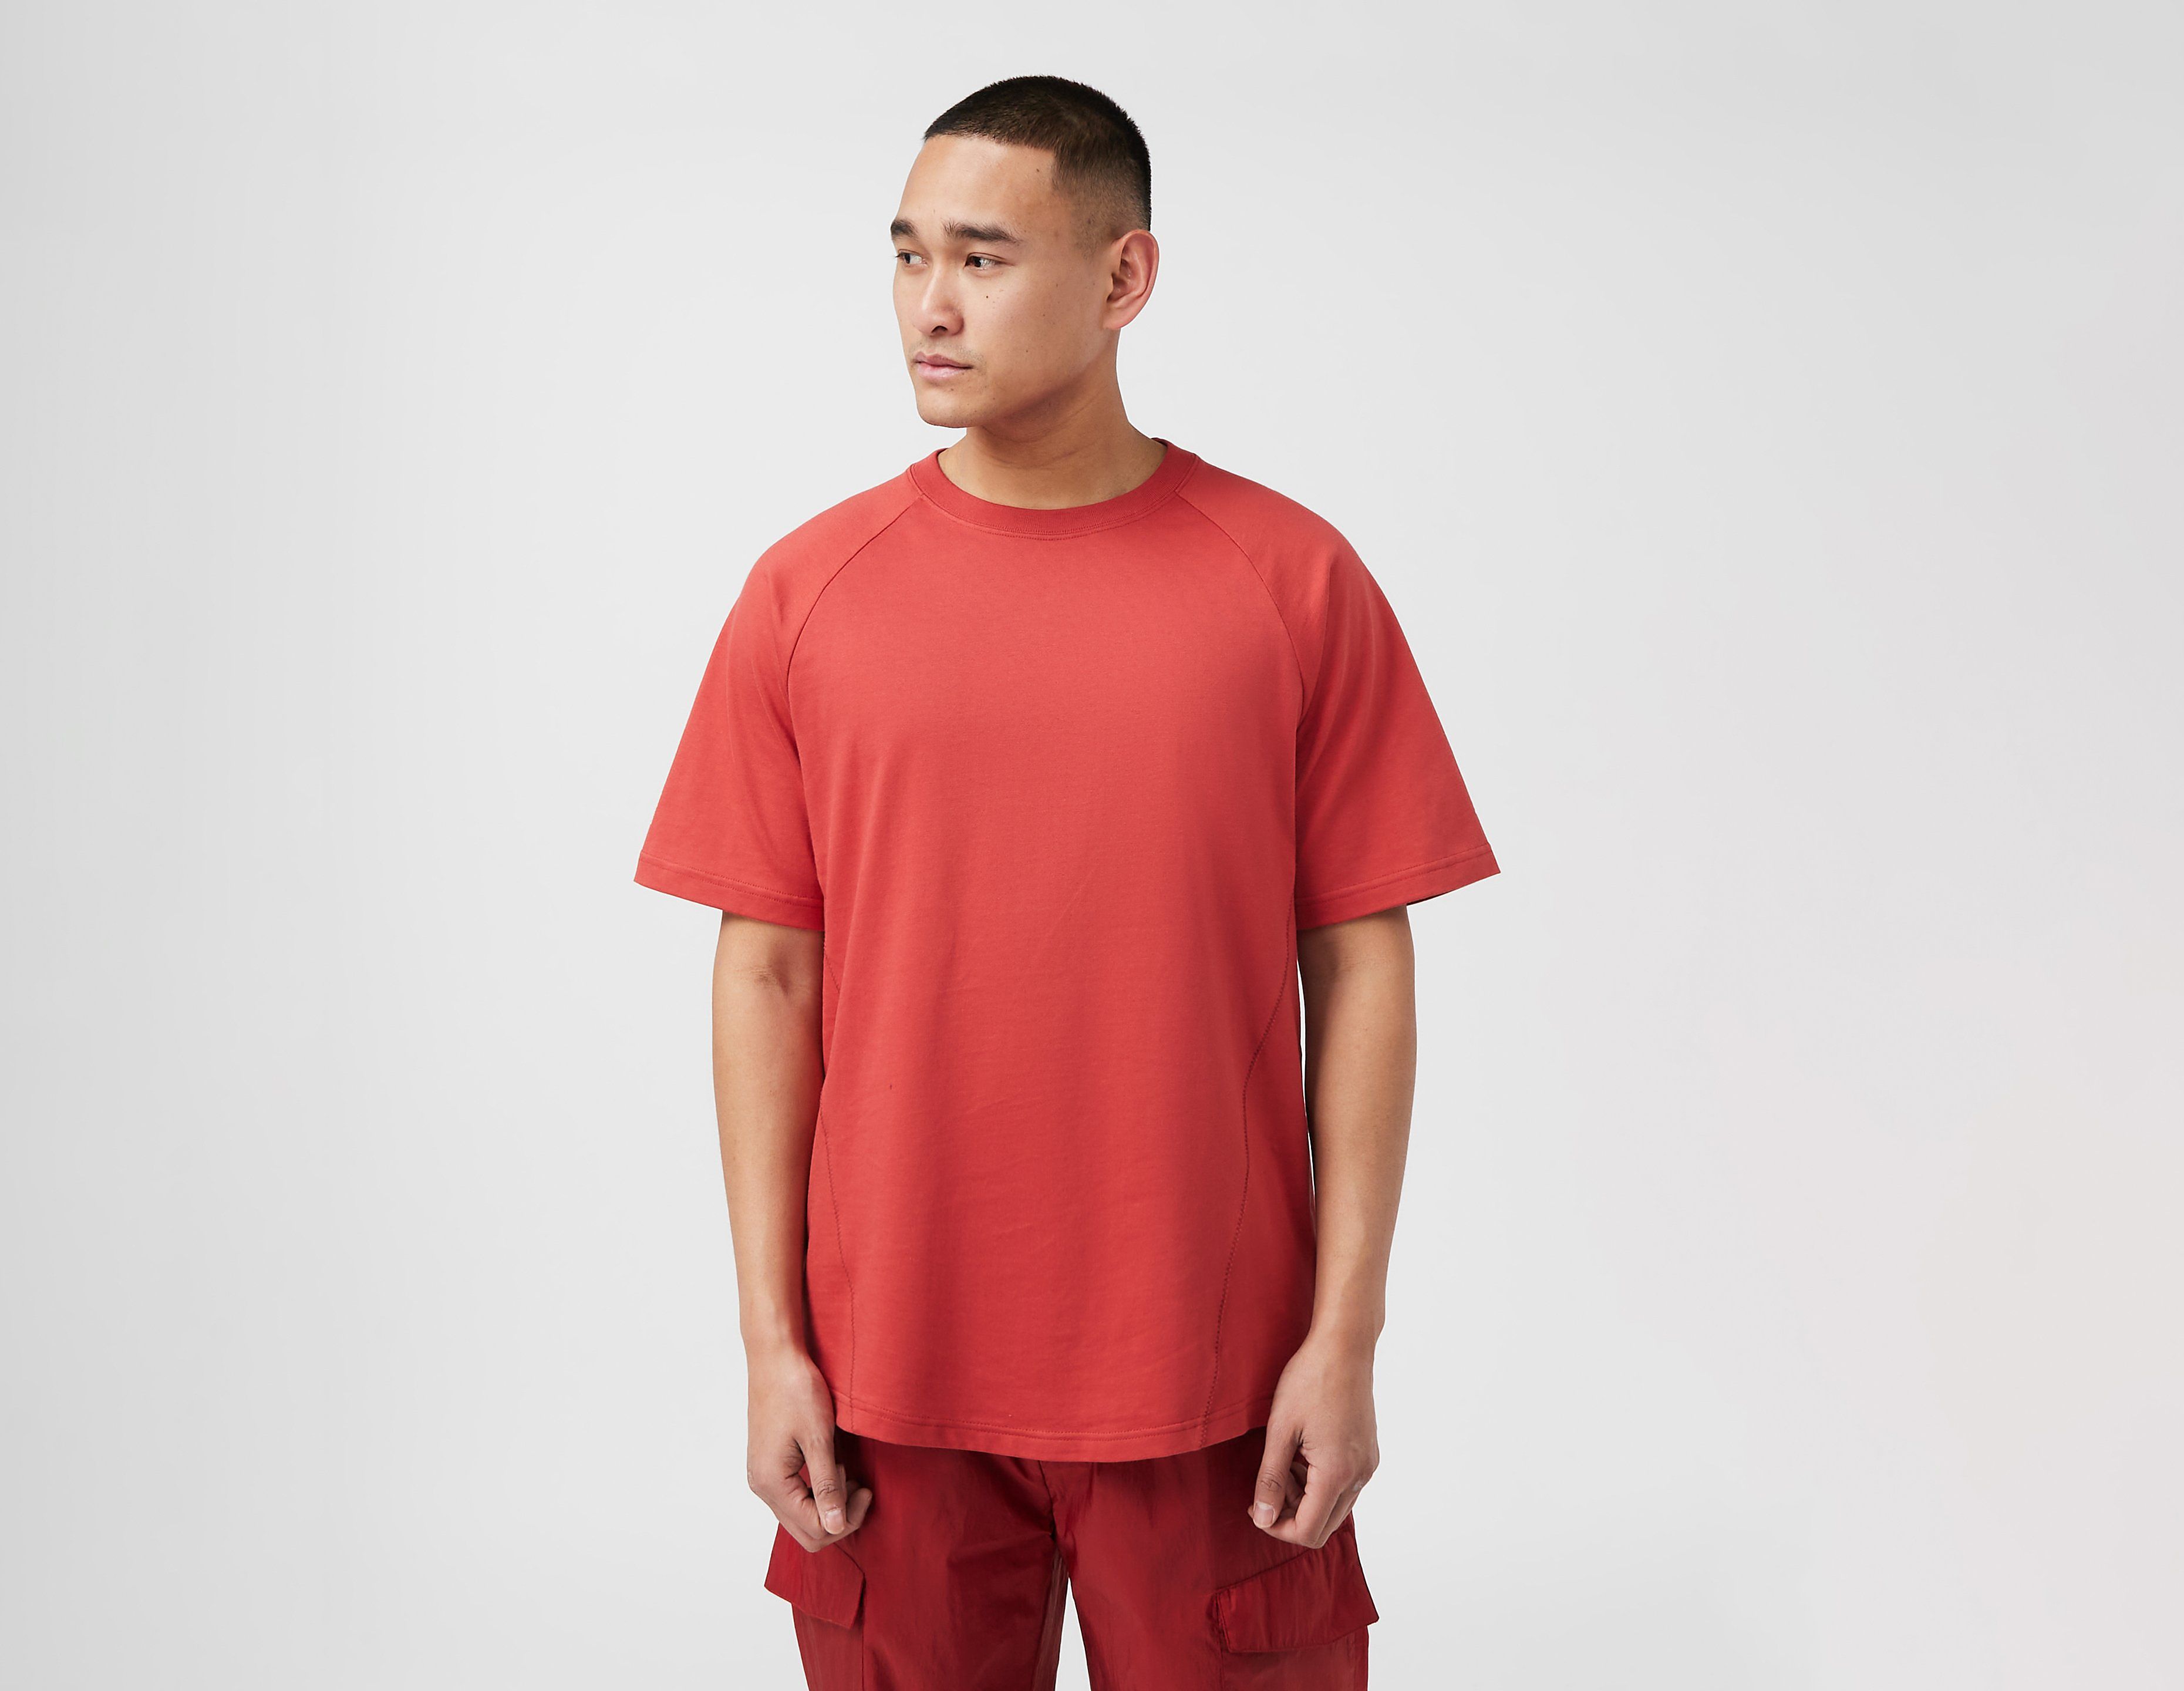 Converse x A-COLD-WALL T-Shirt, Red